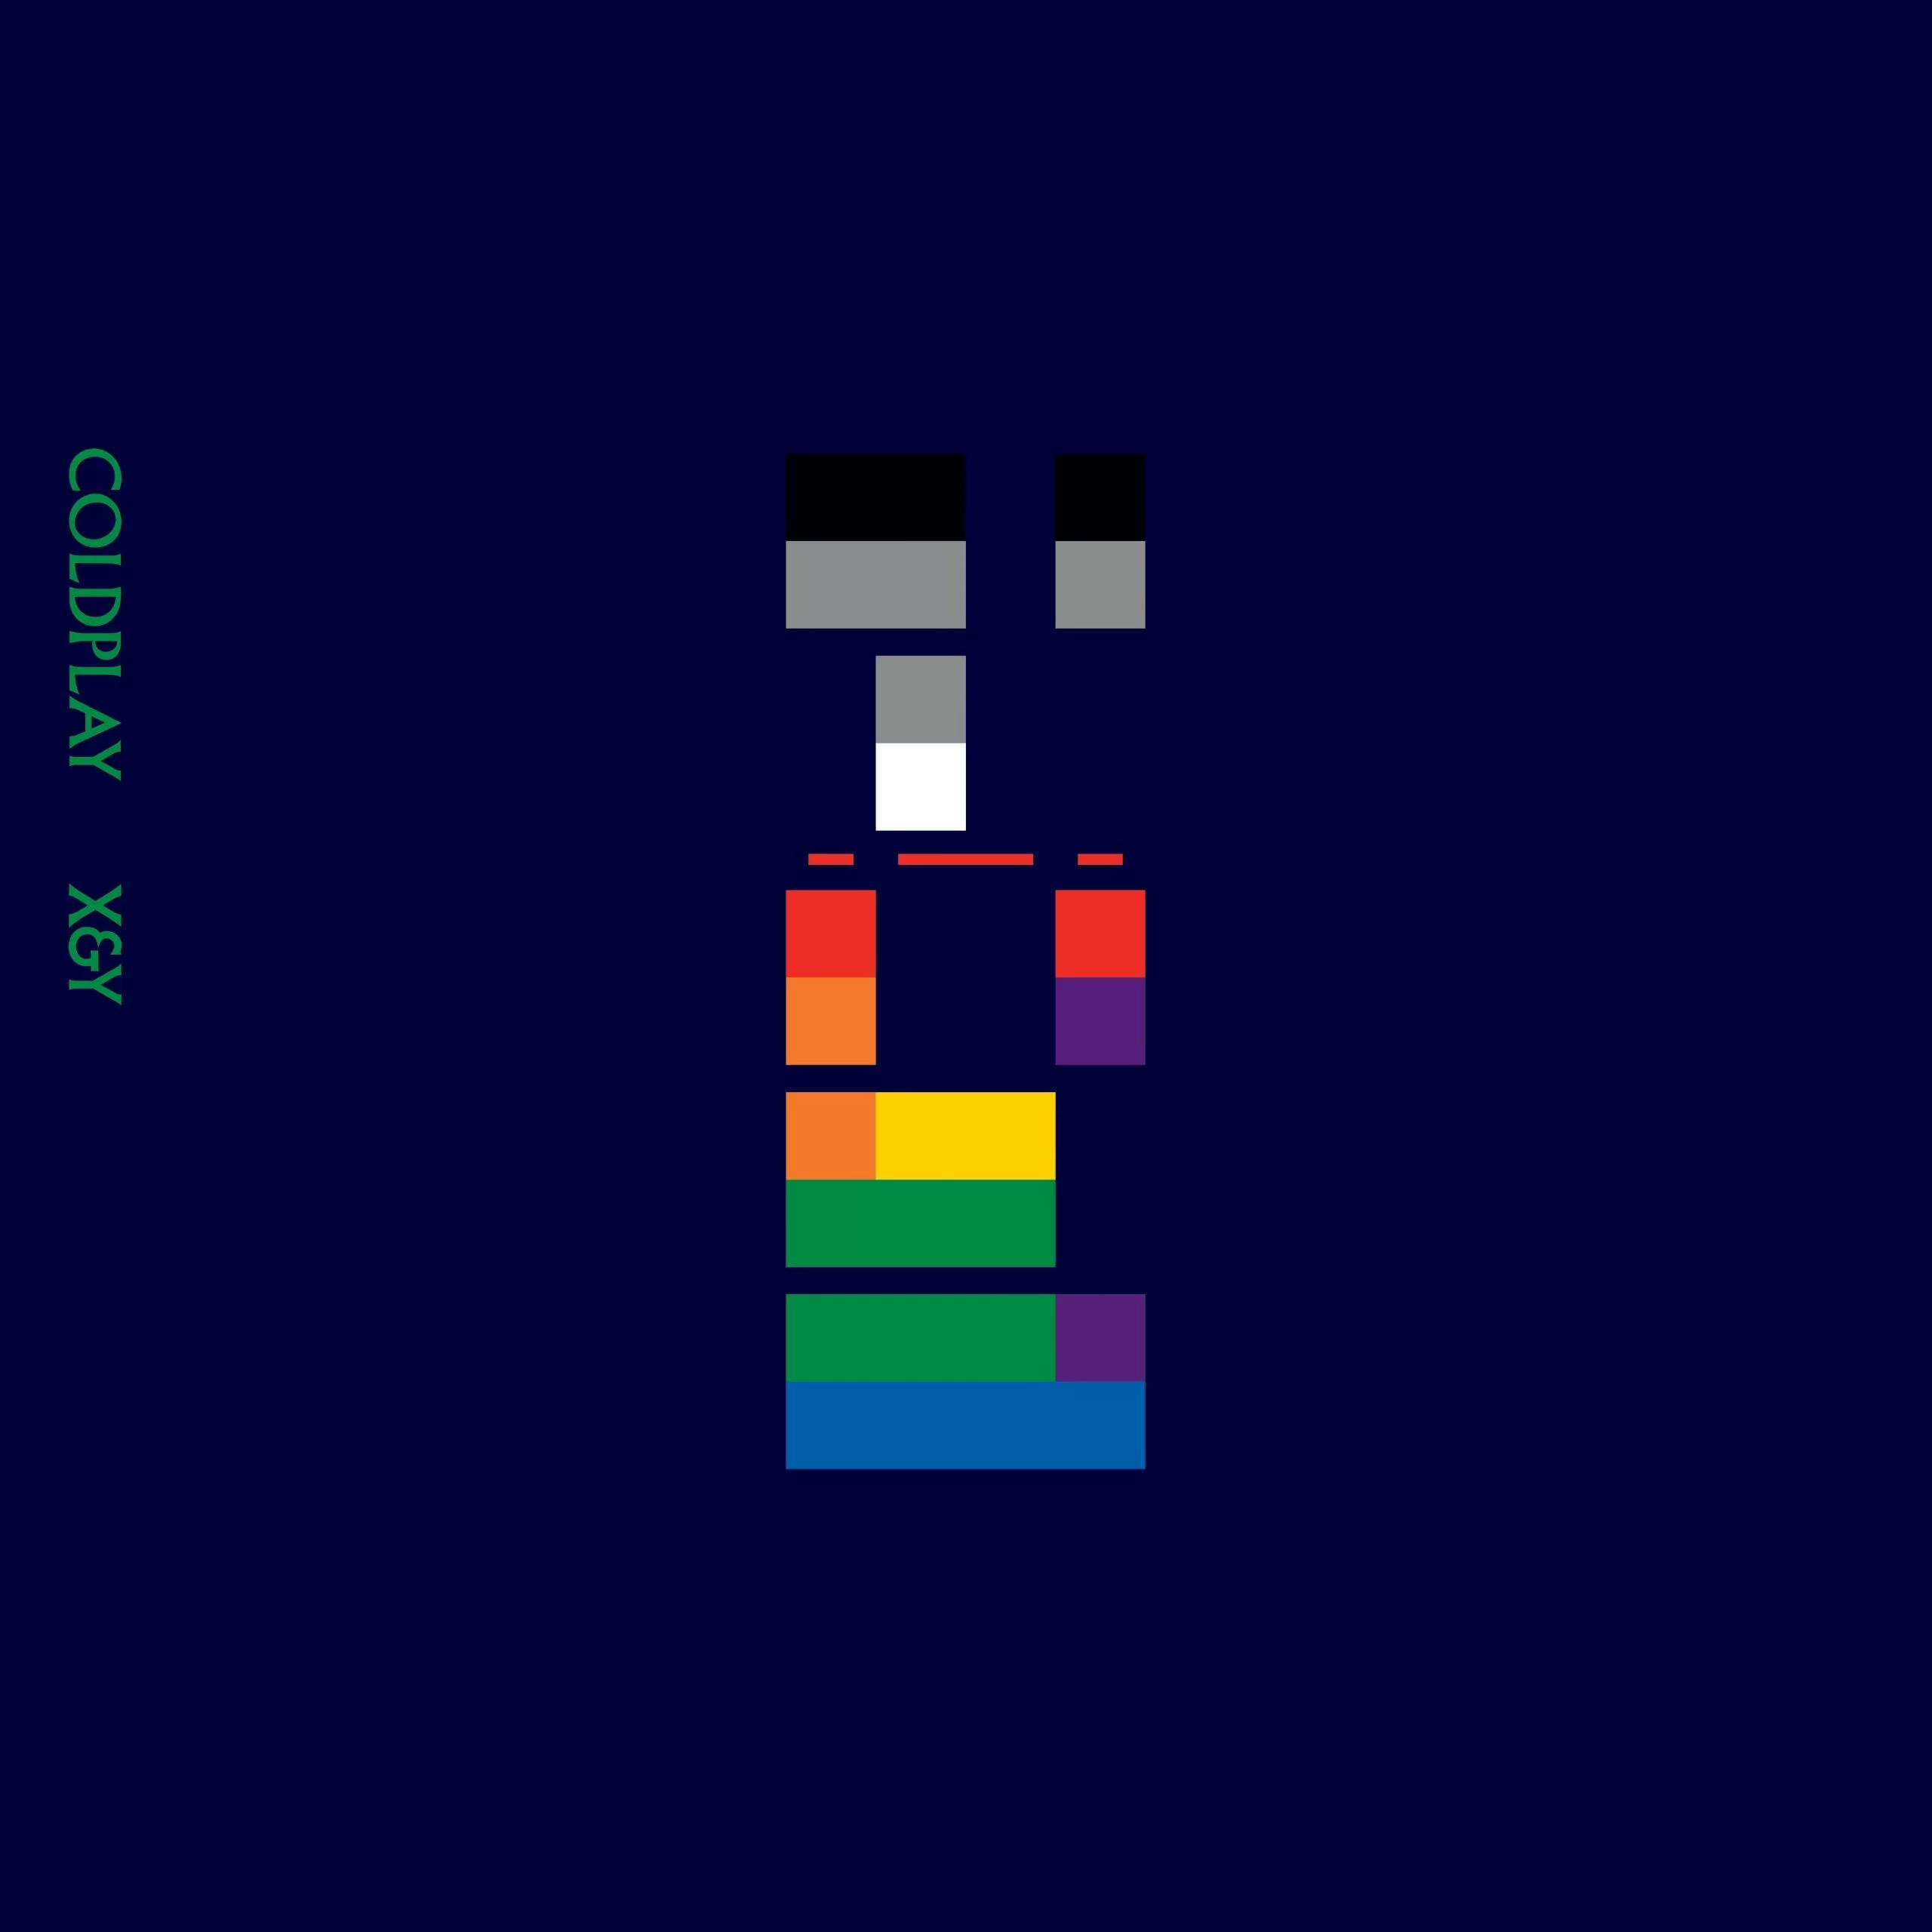 Live in Buenos Aires (Coldplay album) - Wikipedia